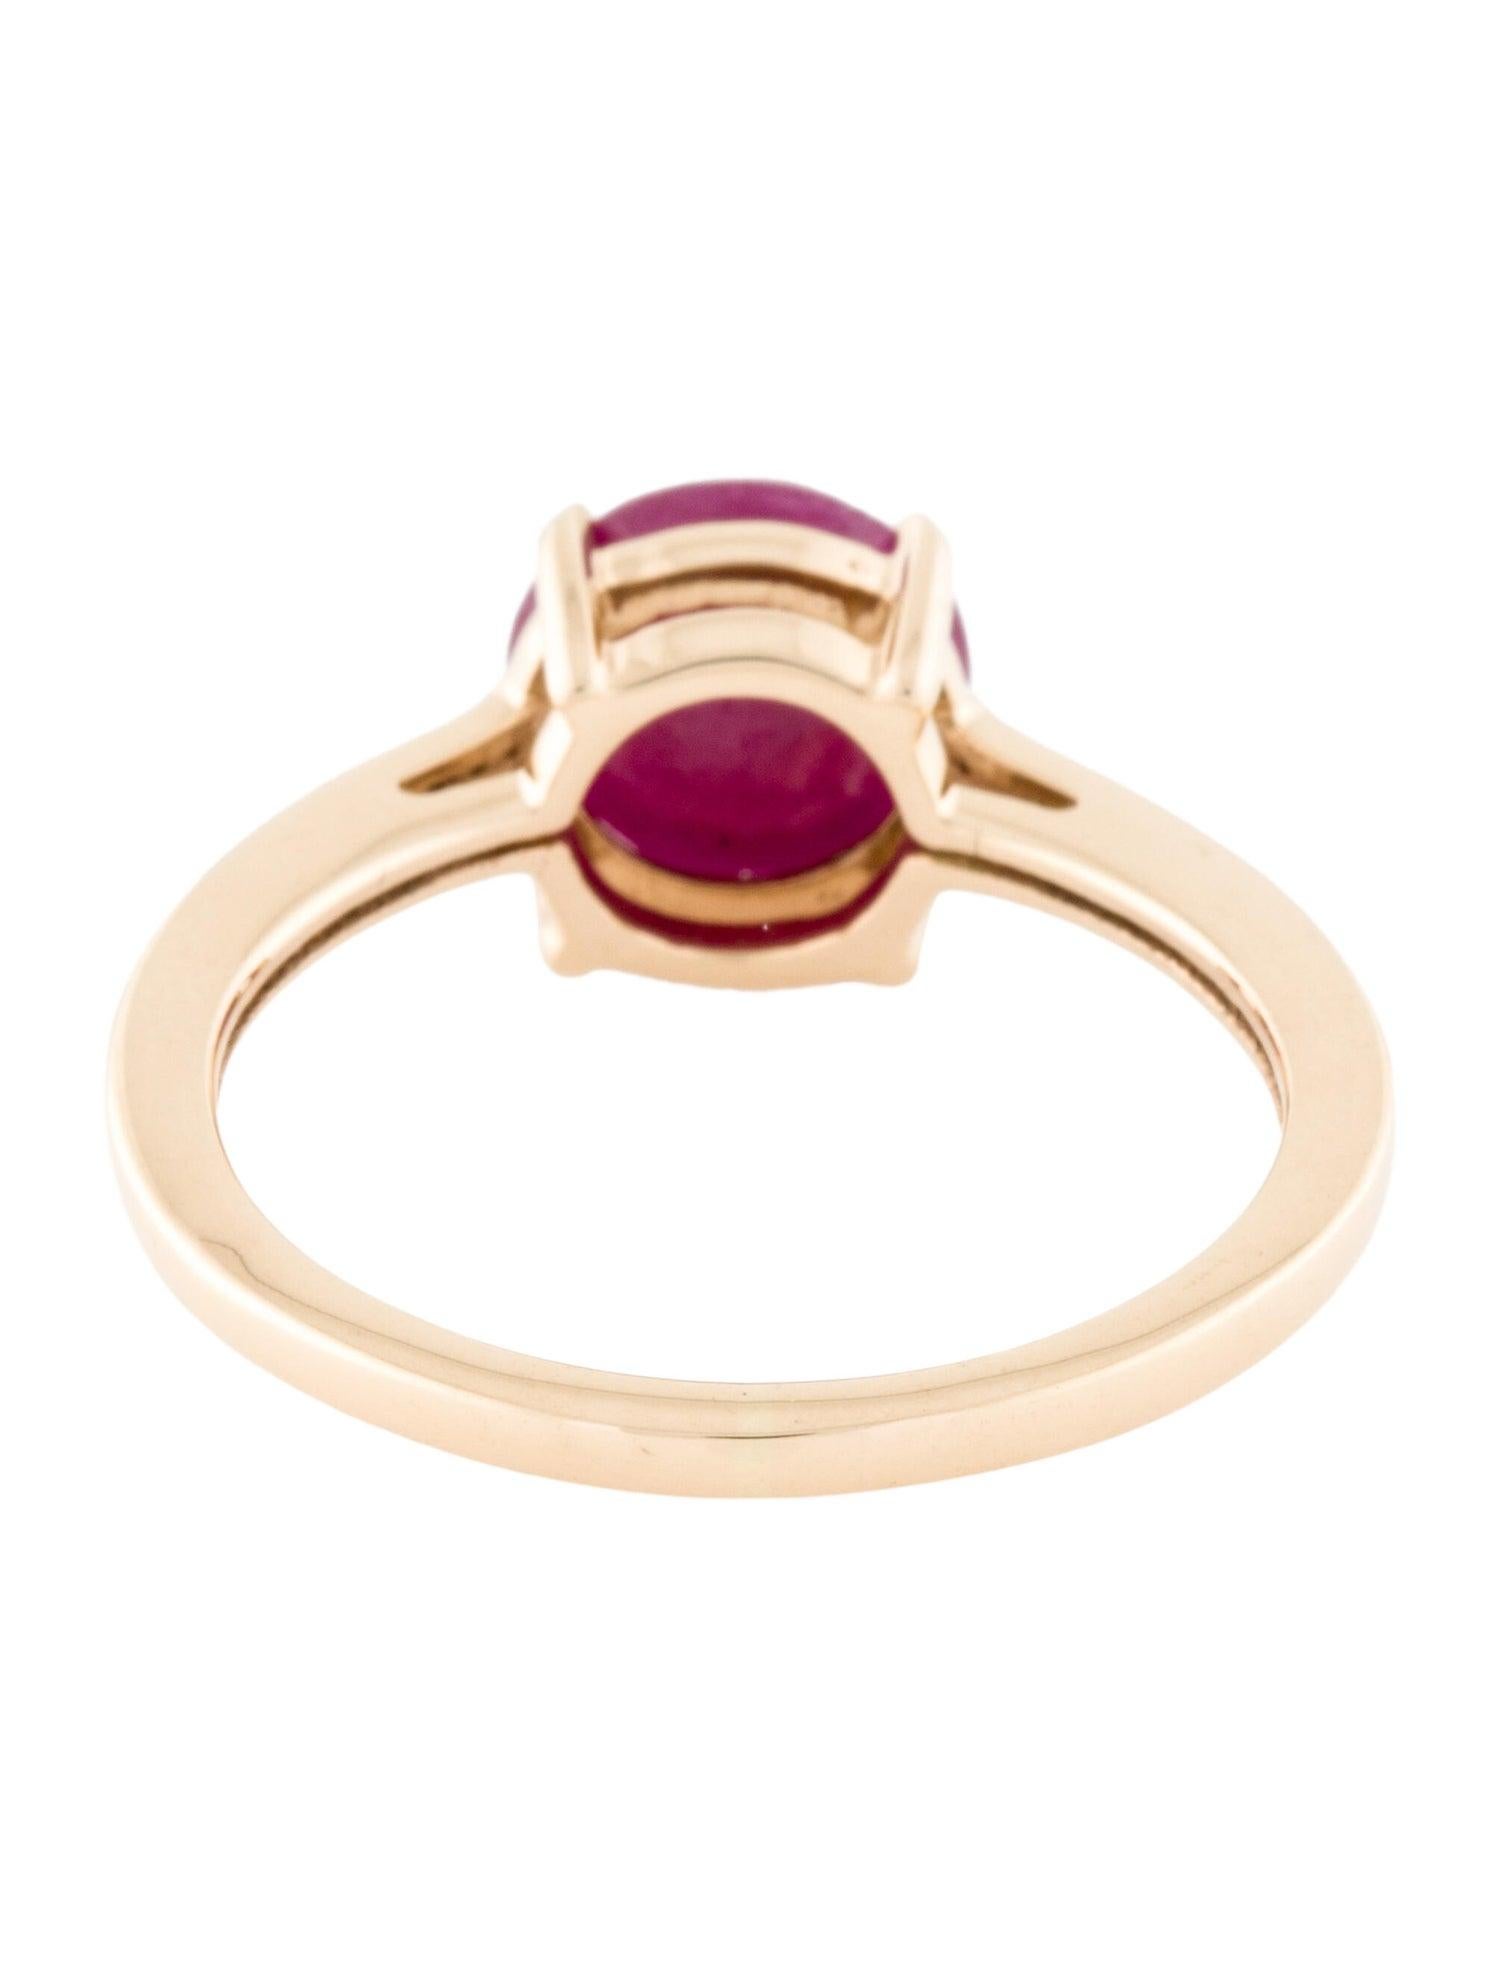 Brilliant Cut 14K Ruby Cocktail Ring 1.56ct - Size 7 - Elegant Statement Jewelry - Luxury For Sale